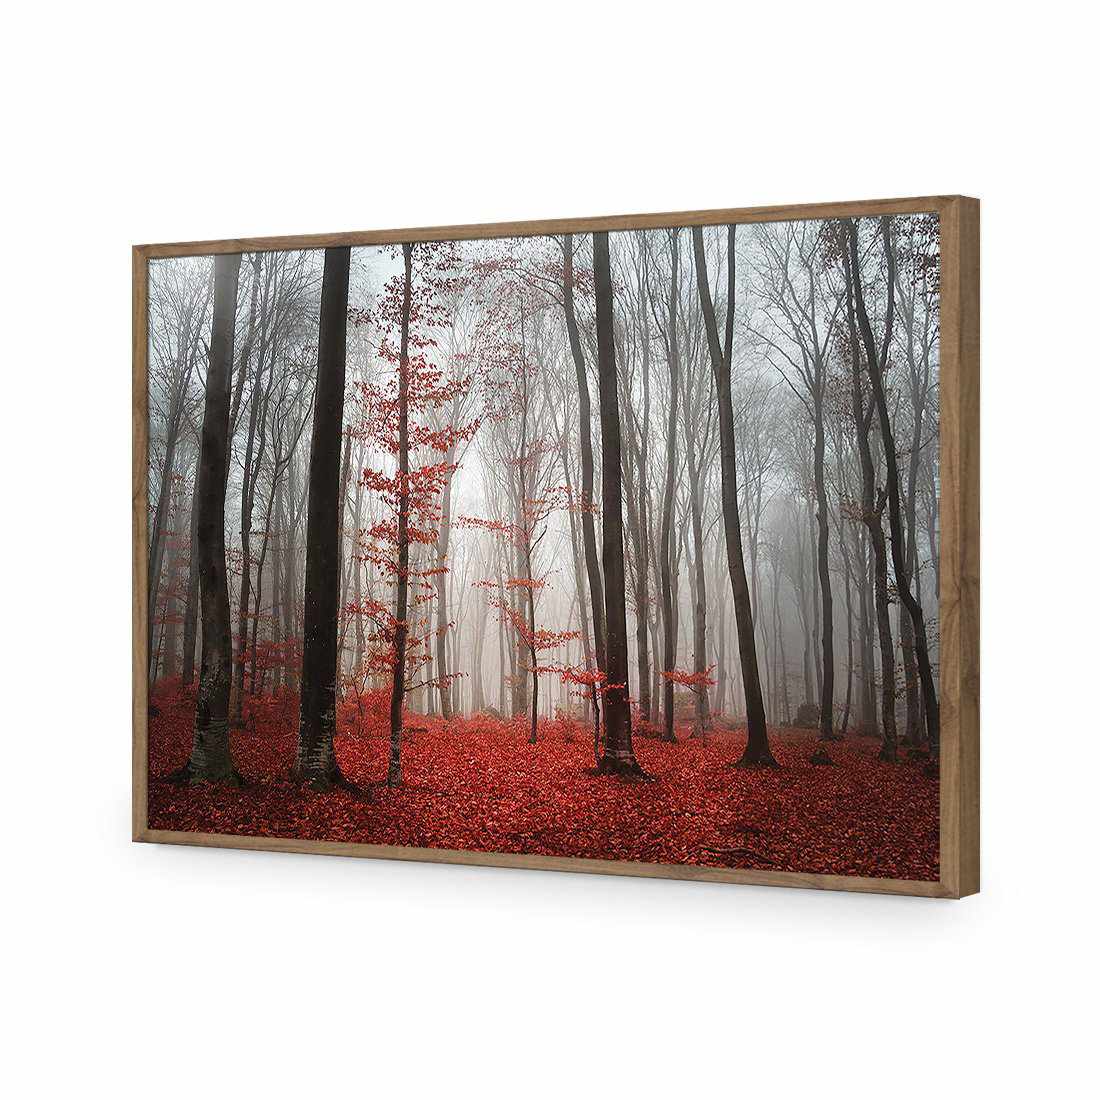 Scarlet Forest-Acrylic-Wall Art Design-Without Border-Acrylic - Natural Frame-45x30cm-Wall Art Designs